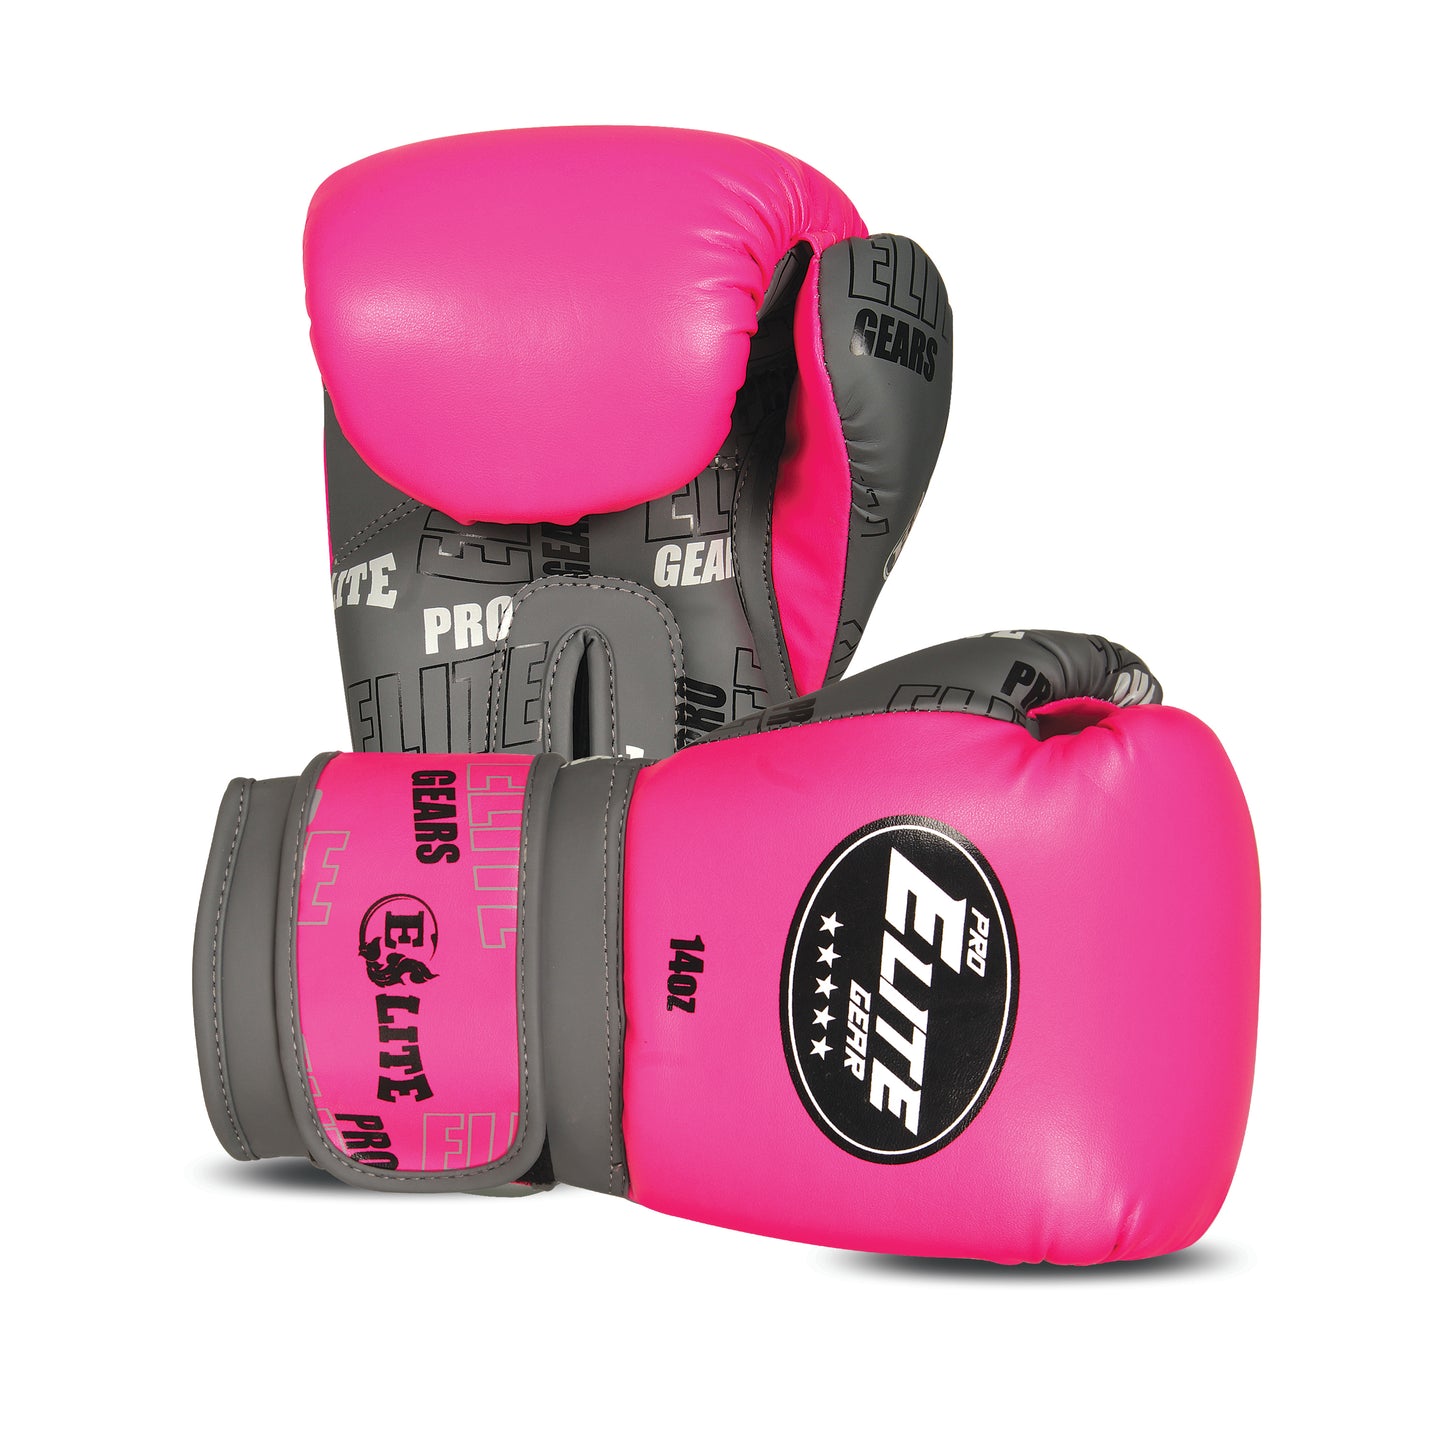 Futuristic 1.0 Boxing Gloves Pink/Grey